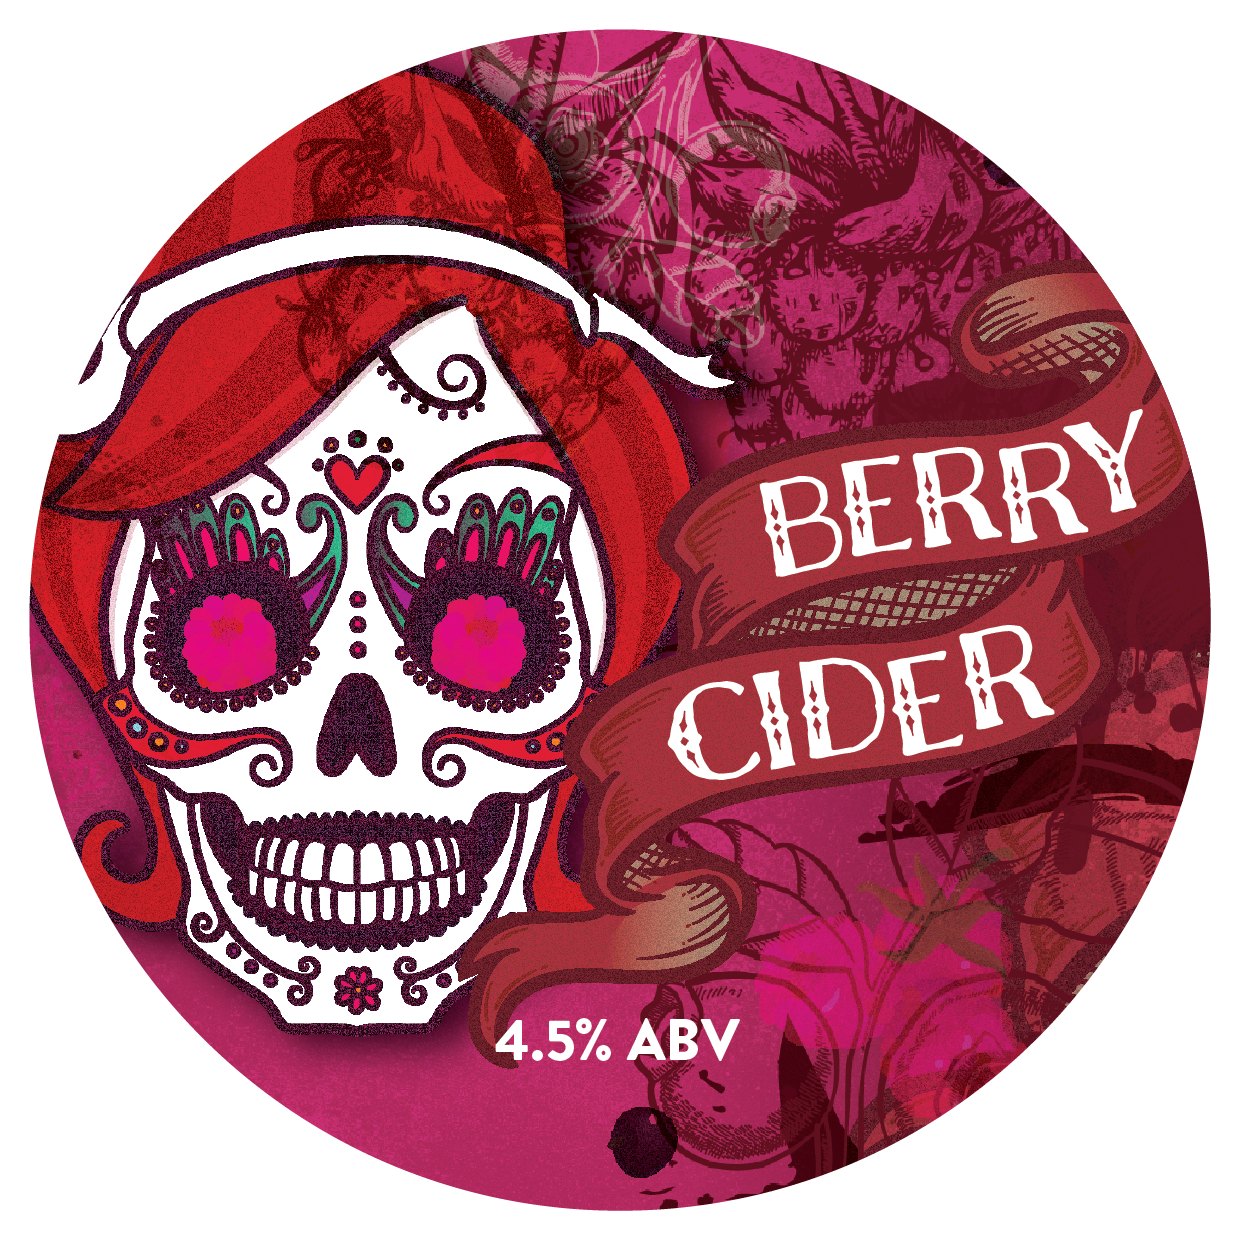 The tap badge artwork for Sprig and Fern's Berry Cider